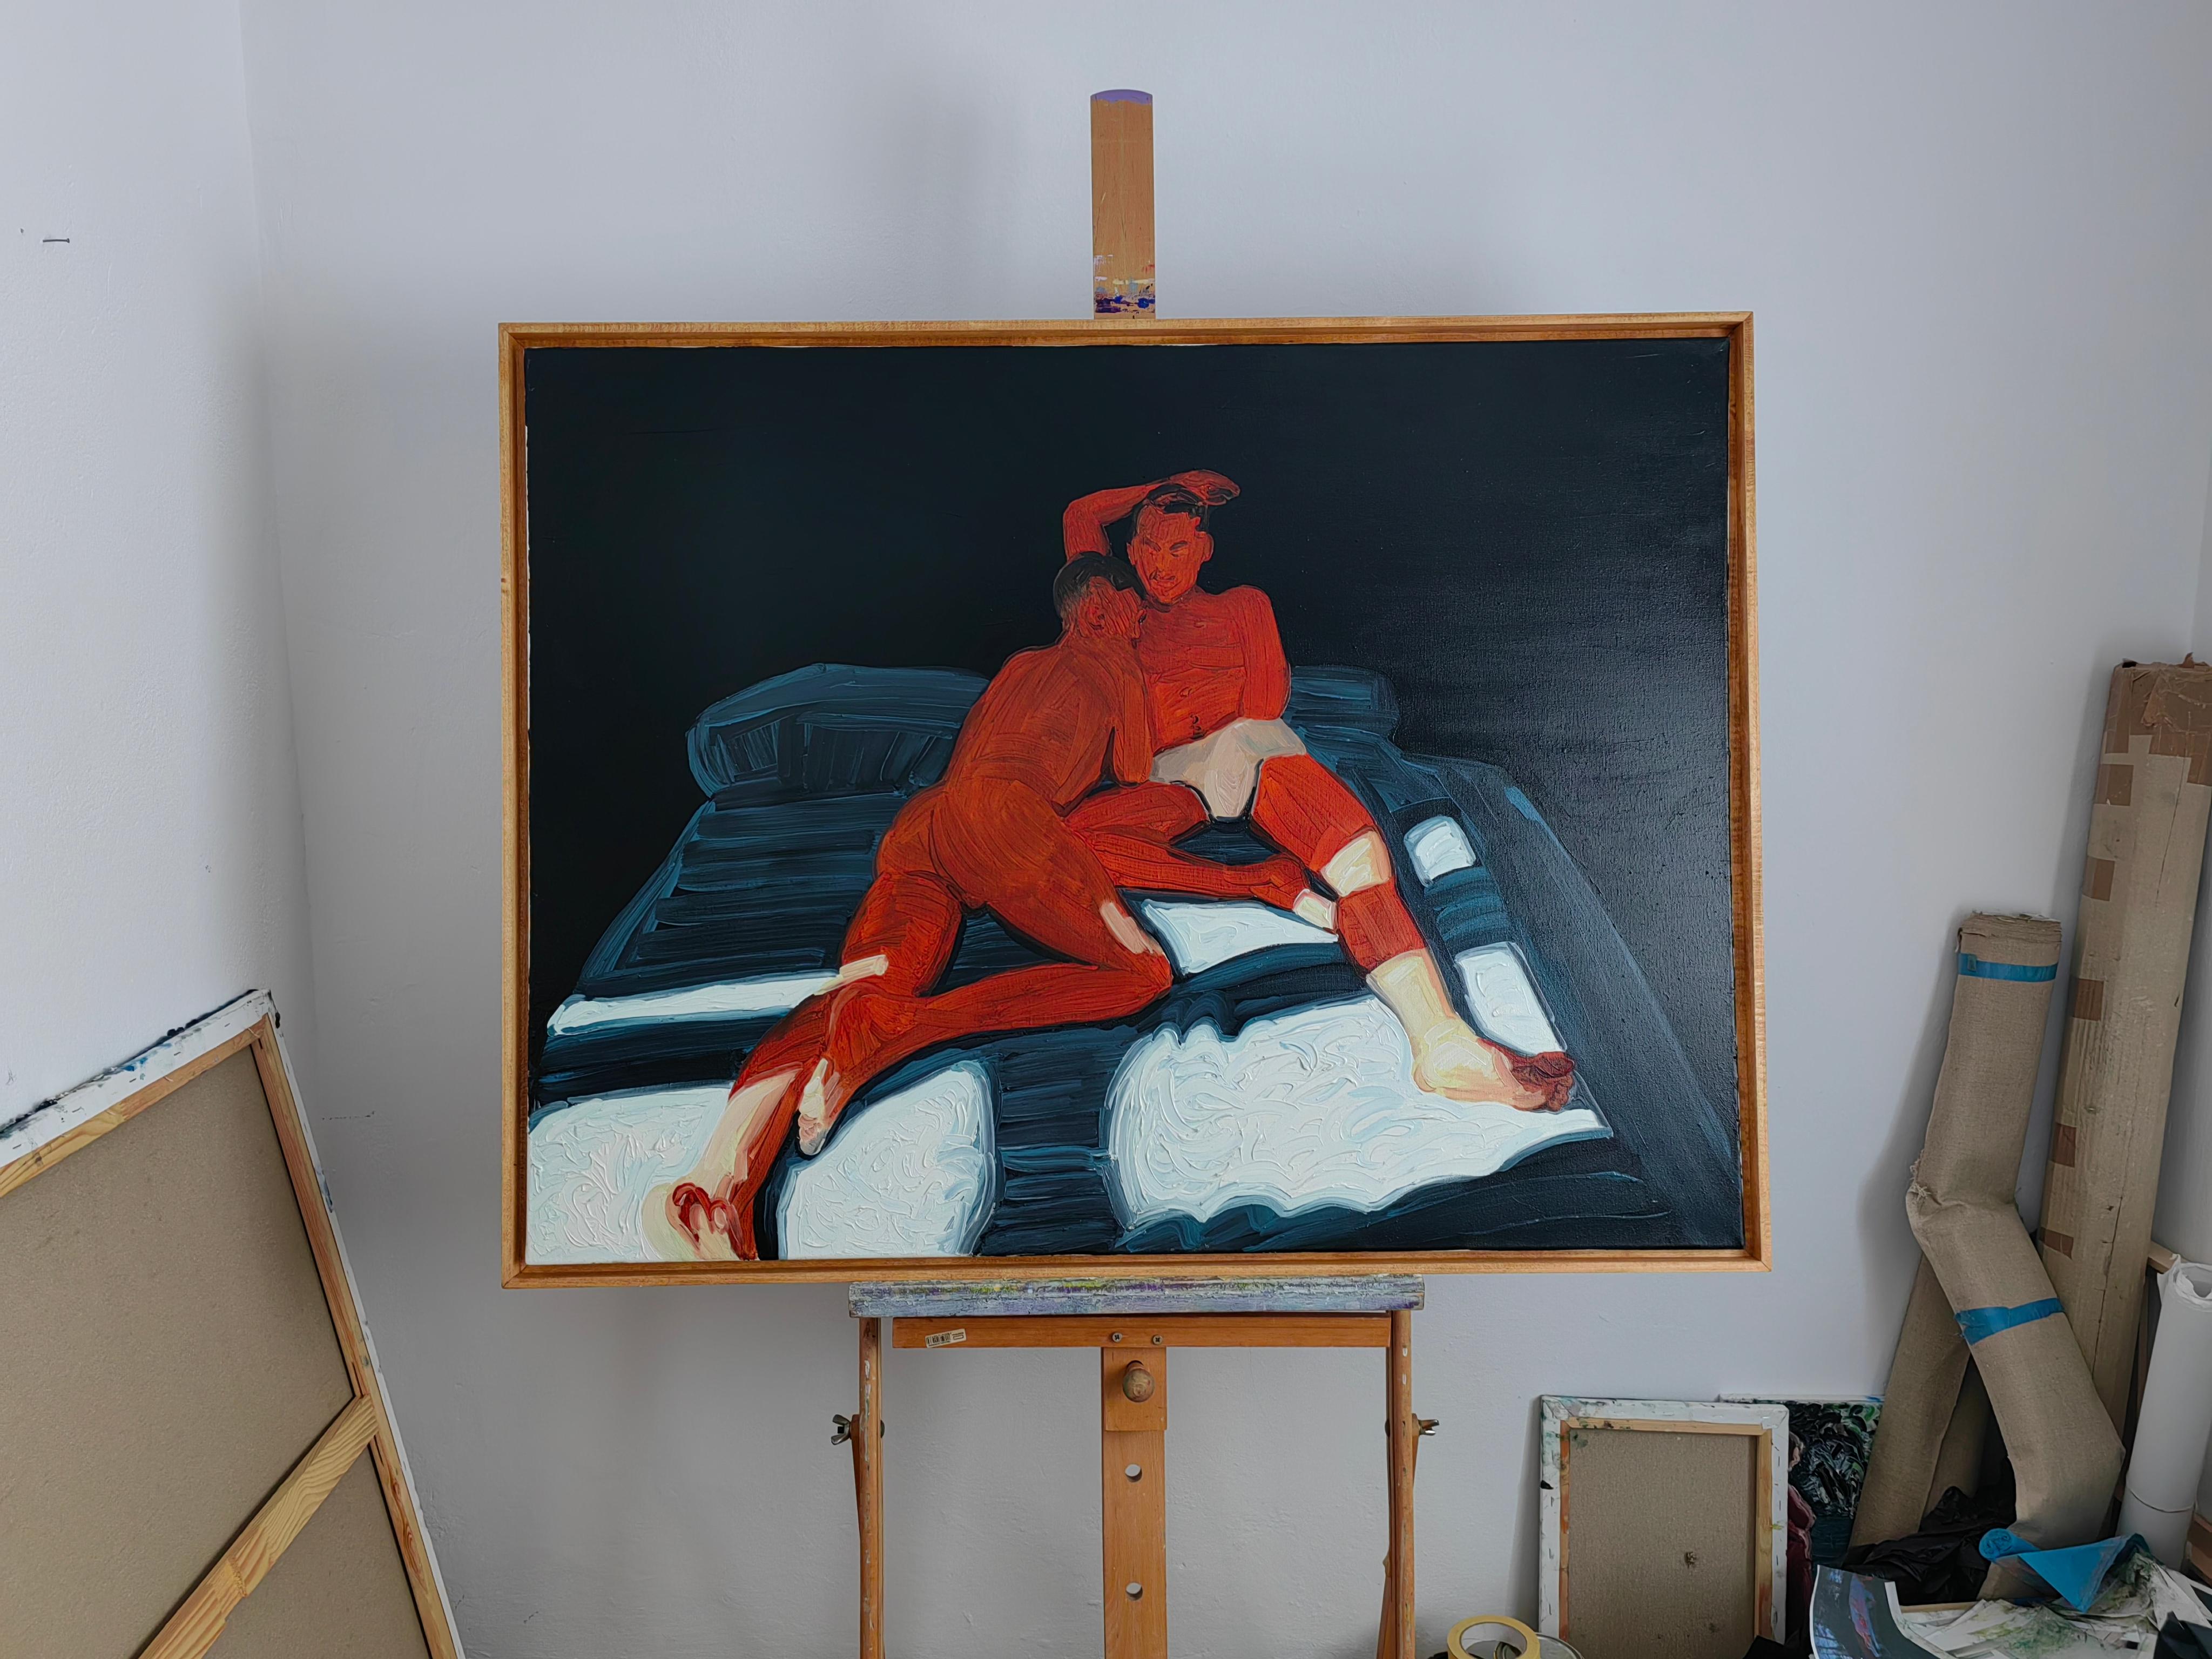 This work is framed. Unframed size: 90x120 cm, framed 95x125 cm

Bartosz Kolata was born in Torun, Poland in 1979. In 2006 he graduated in Art Conservation and Restoration from Nicolas Copernicus University UMK, securing a Master of Art degree. He